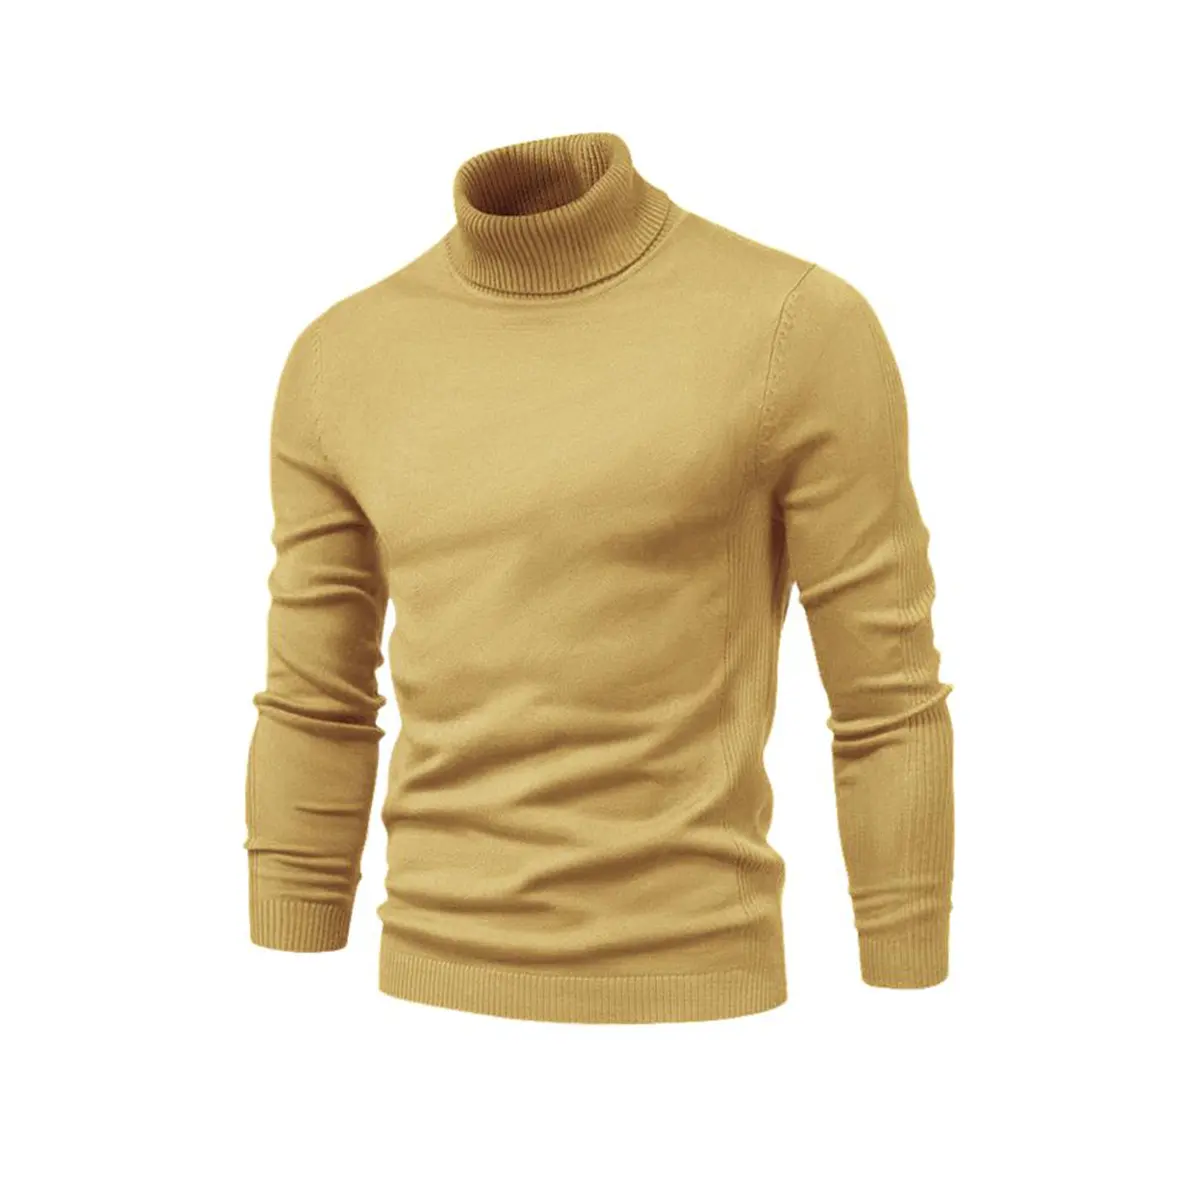 2022 new fashion Mens Designer Wholesale Turtle Neck Plain Customize size knitting Pullover High Collar Sweater Clothing